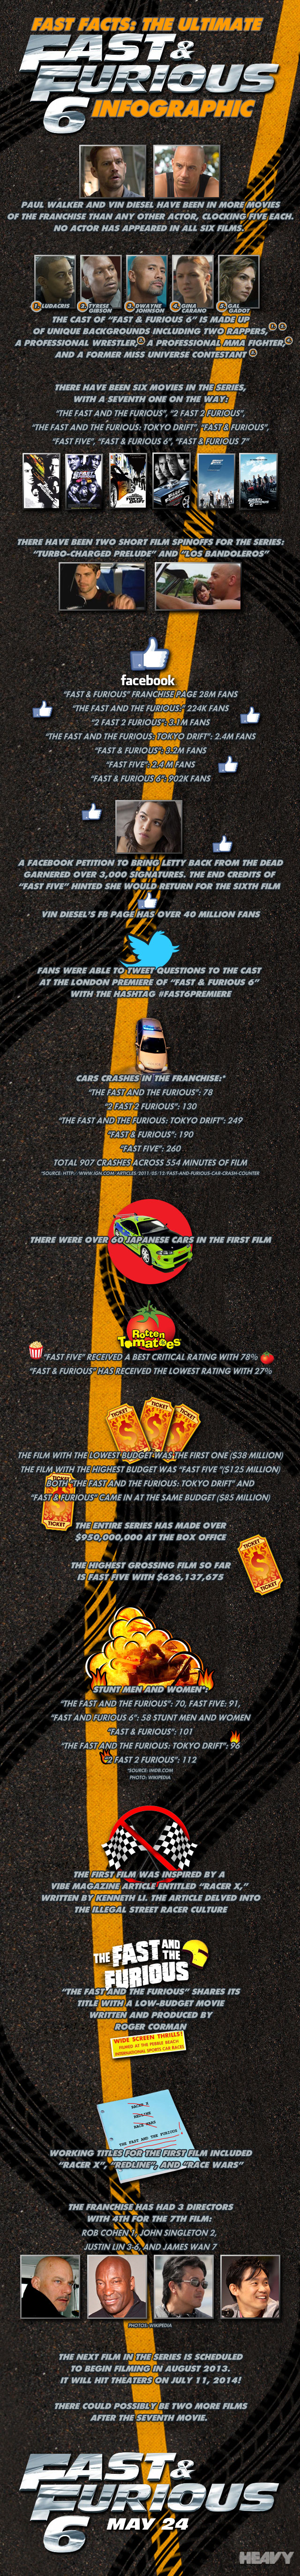  'Fast & Furious 6' Infographic 